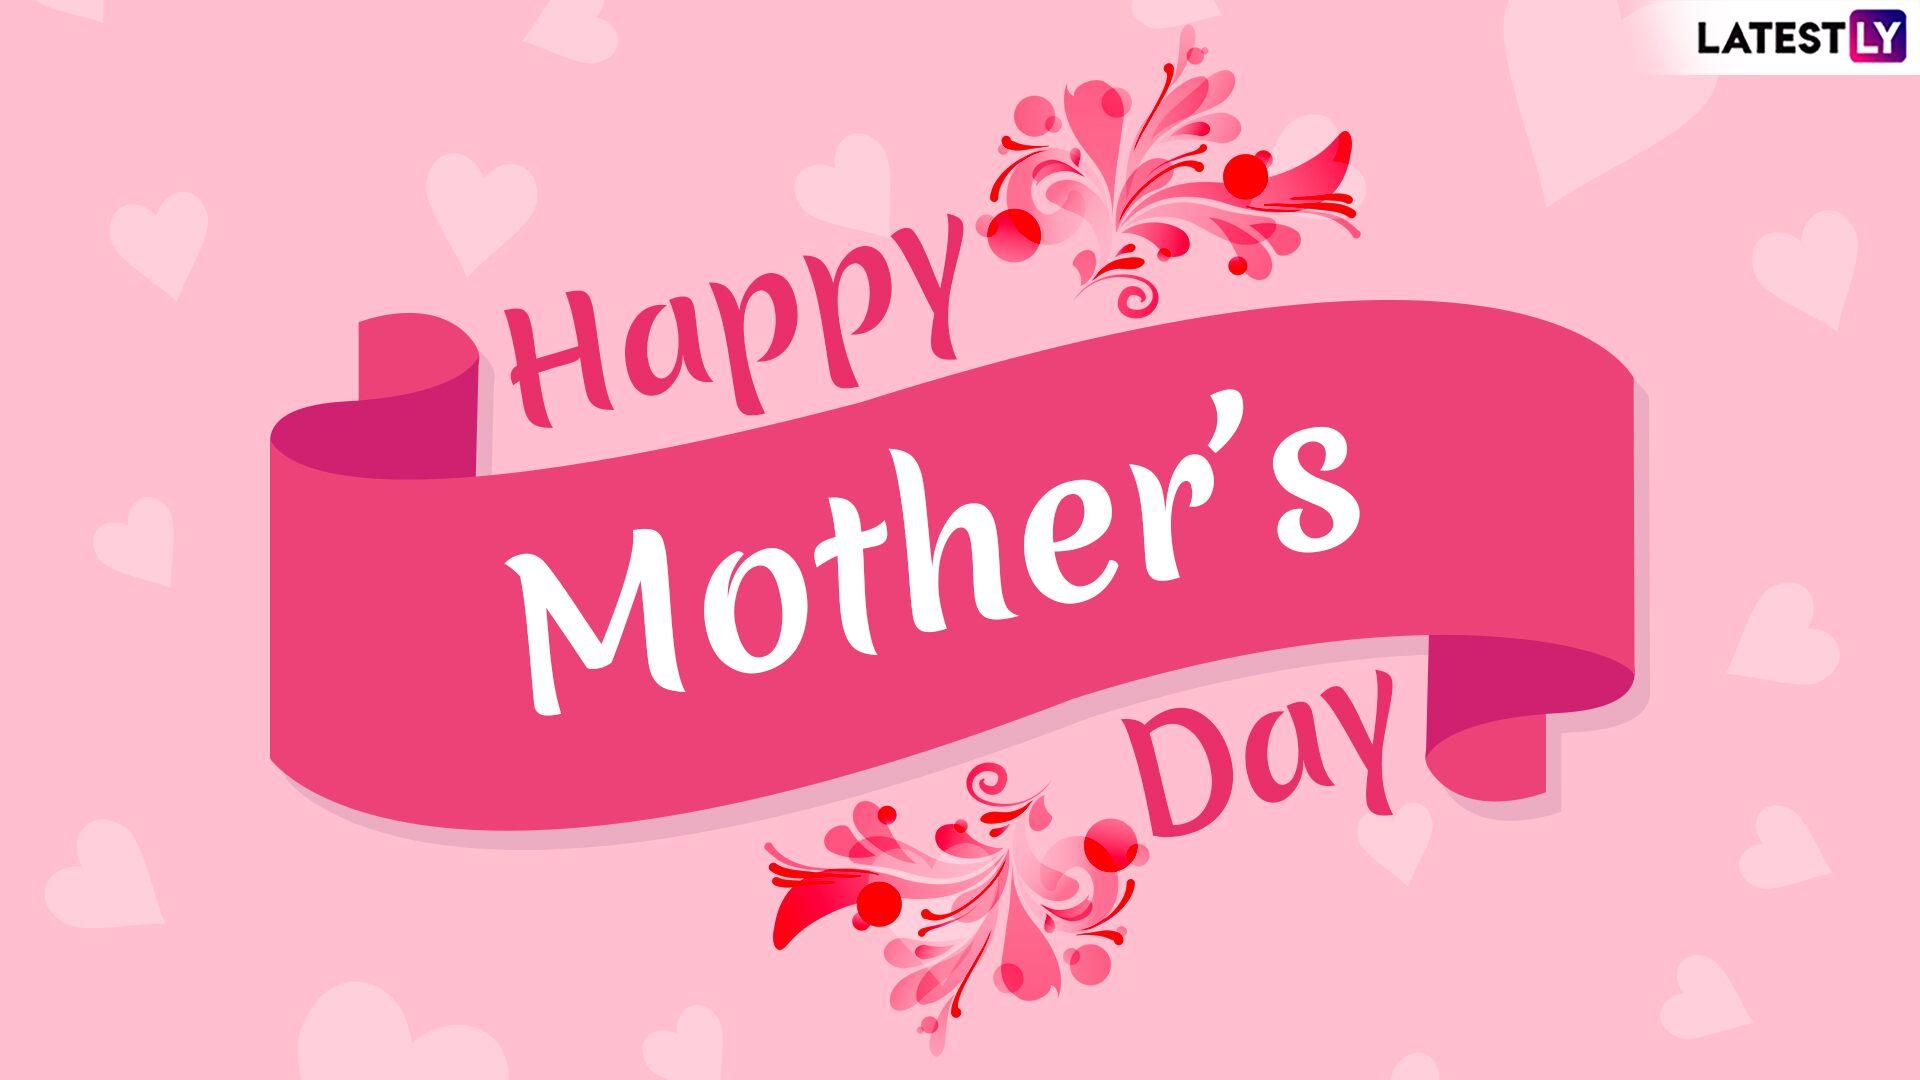 Happy Mother's Day HD Image, Quotes and Wallpaper for Free Download Online: Send Mother's Day 2019 Wishes With GIF Greetings & WhatsApp Sticker Messages